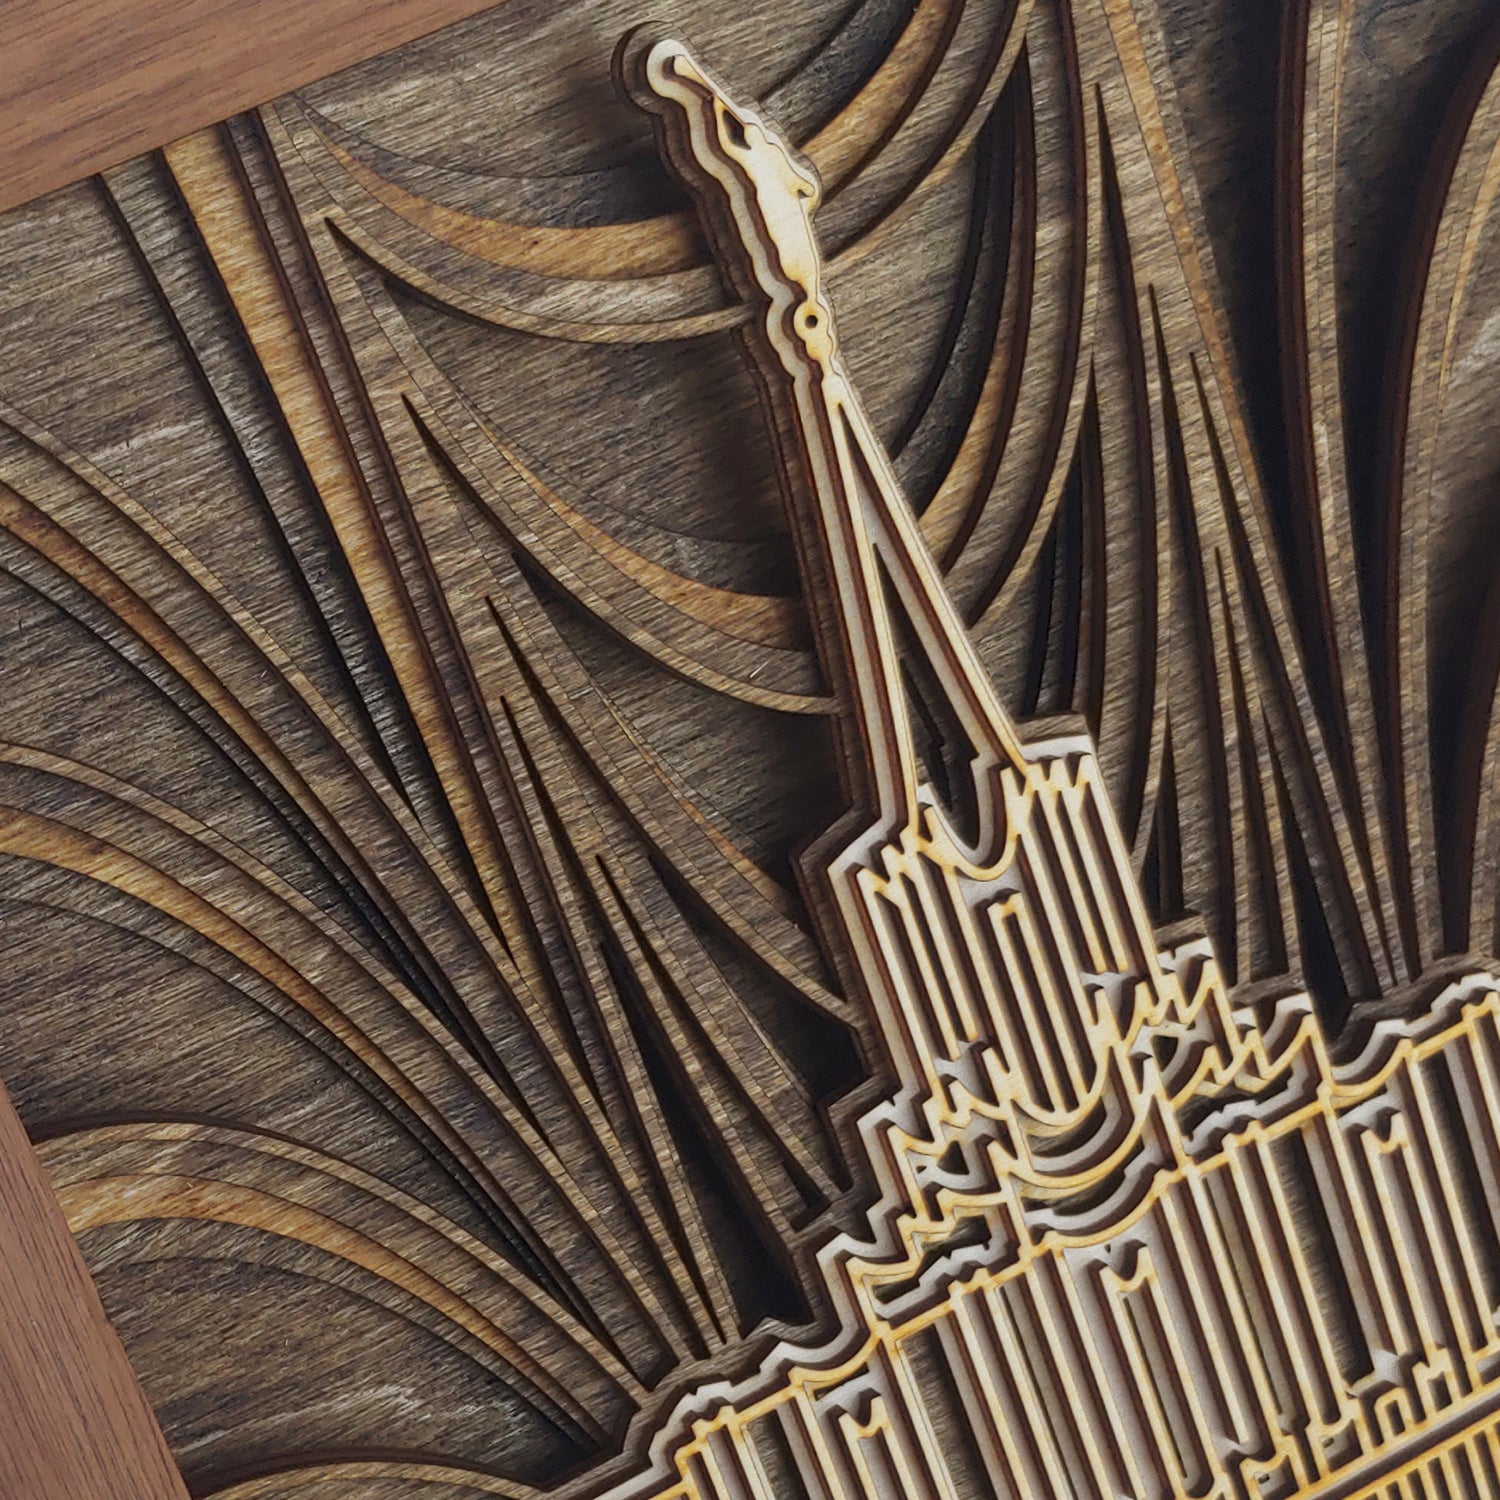 NEW DESIGN Creation for Layered Temple Wood Plaque